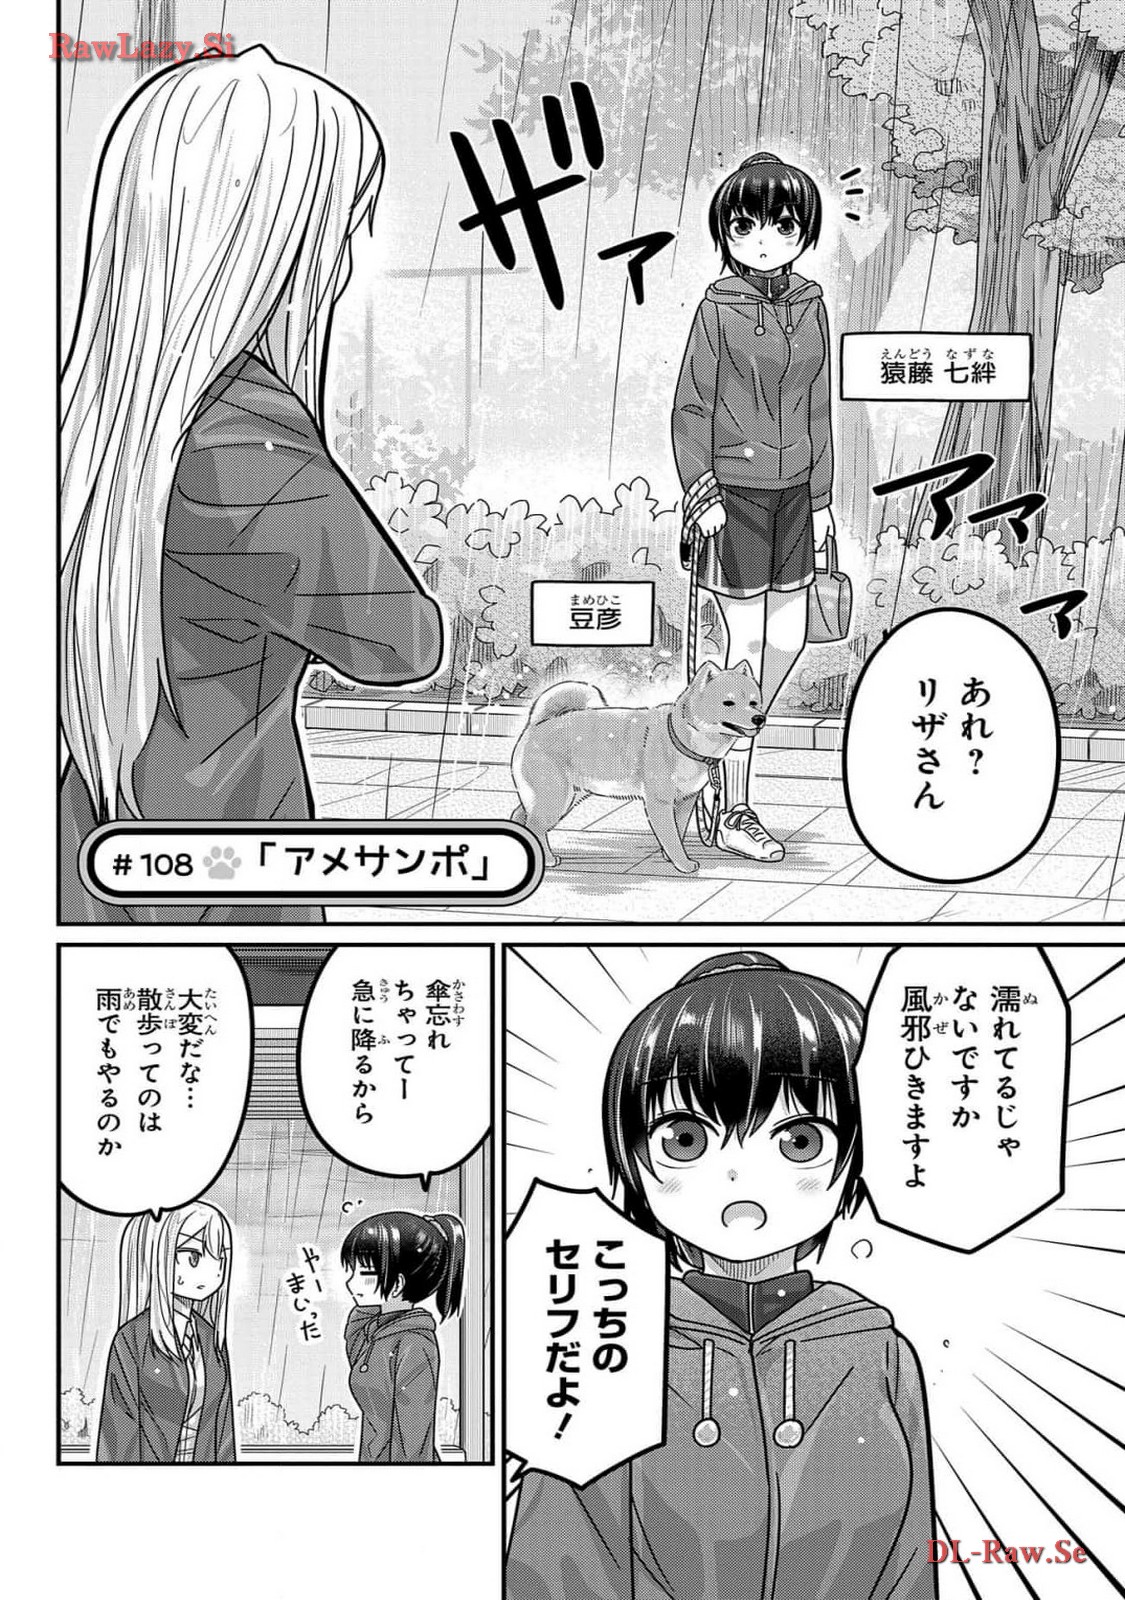 Kawaisugi Crisis - Chapter Kawaisugi_Crisis_Chapter_108 - Page 2